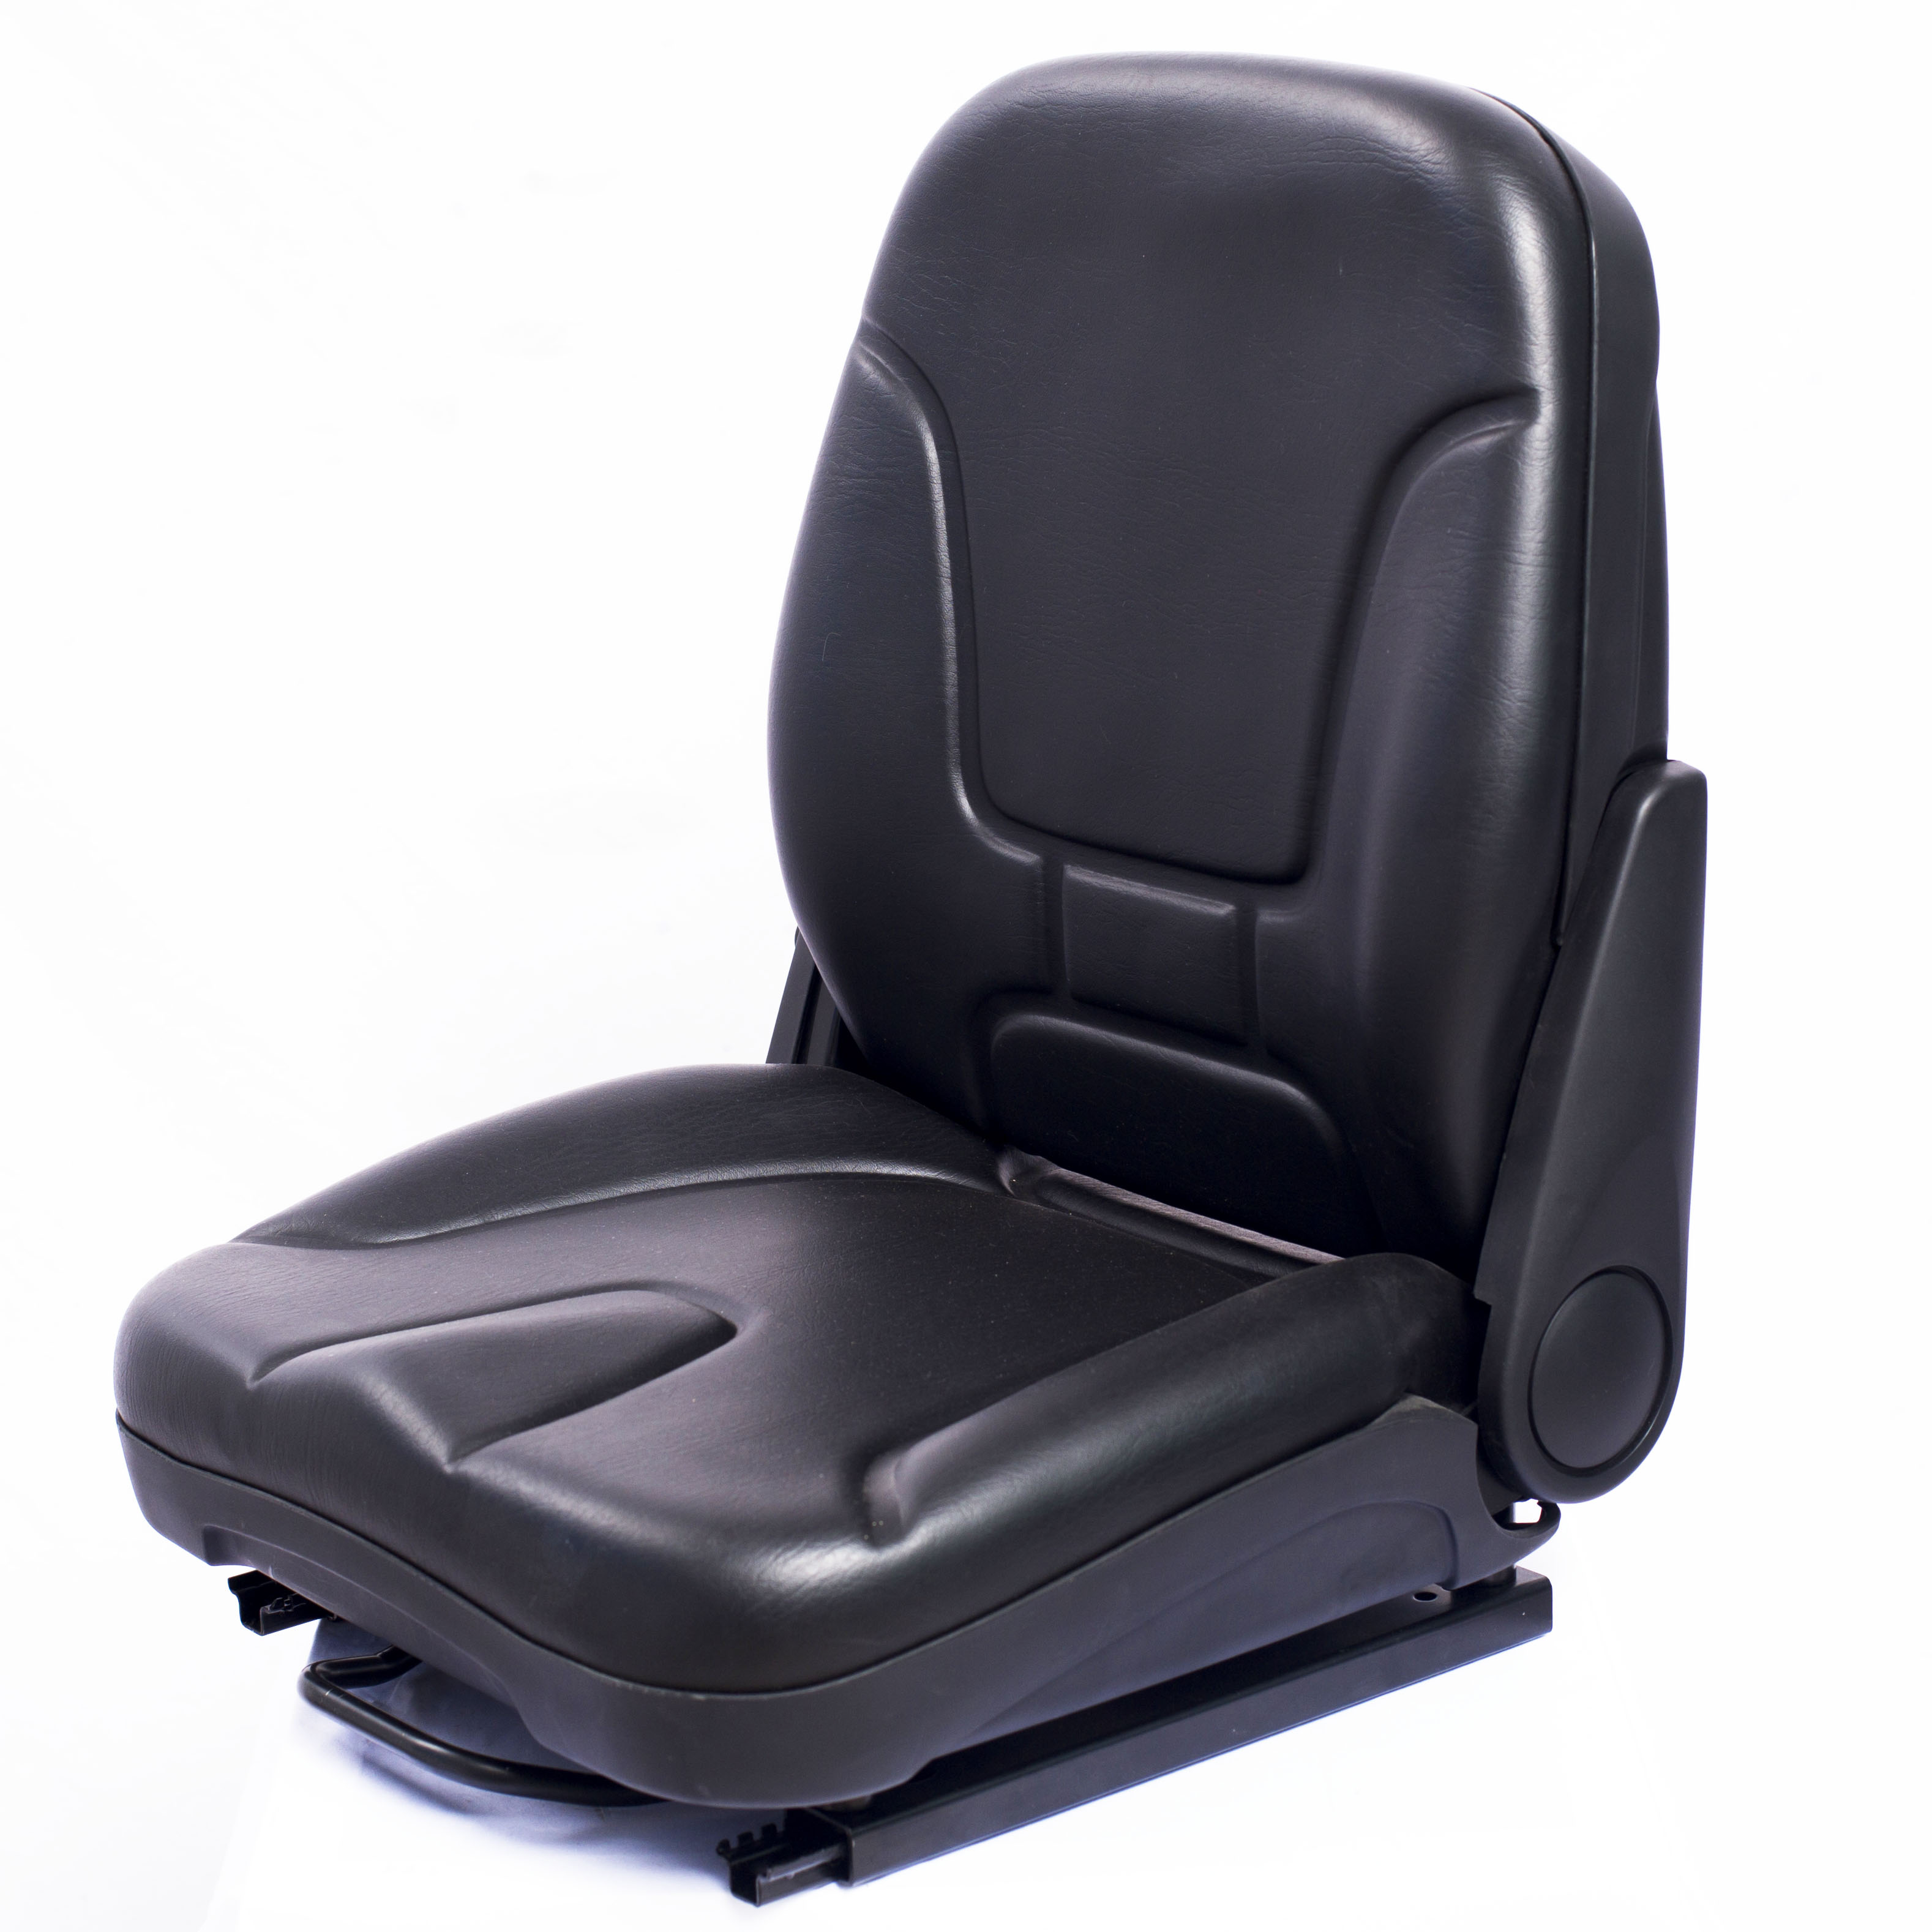 Competitive Price for Diy Suspension Seat - YY23 Excavator digger seat – Qinglin Seat